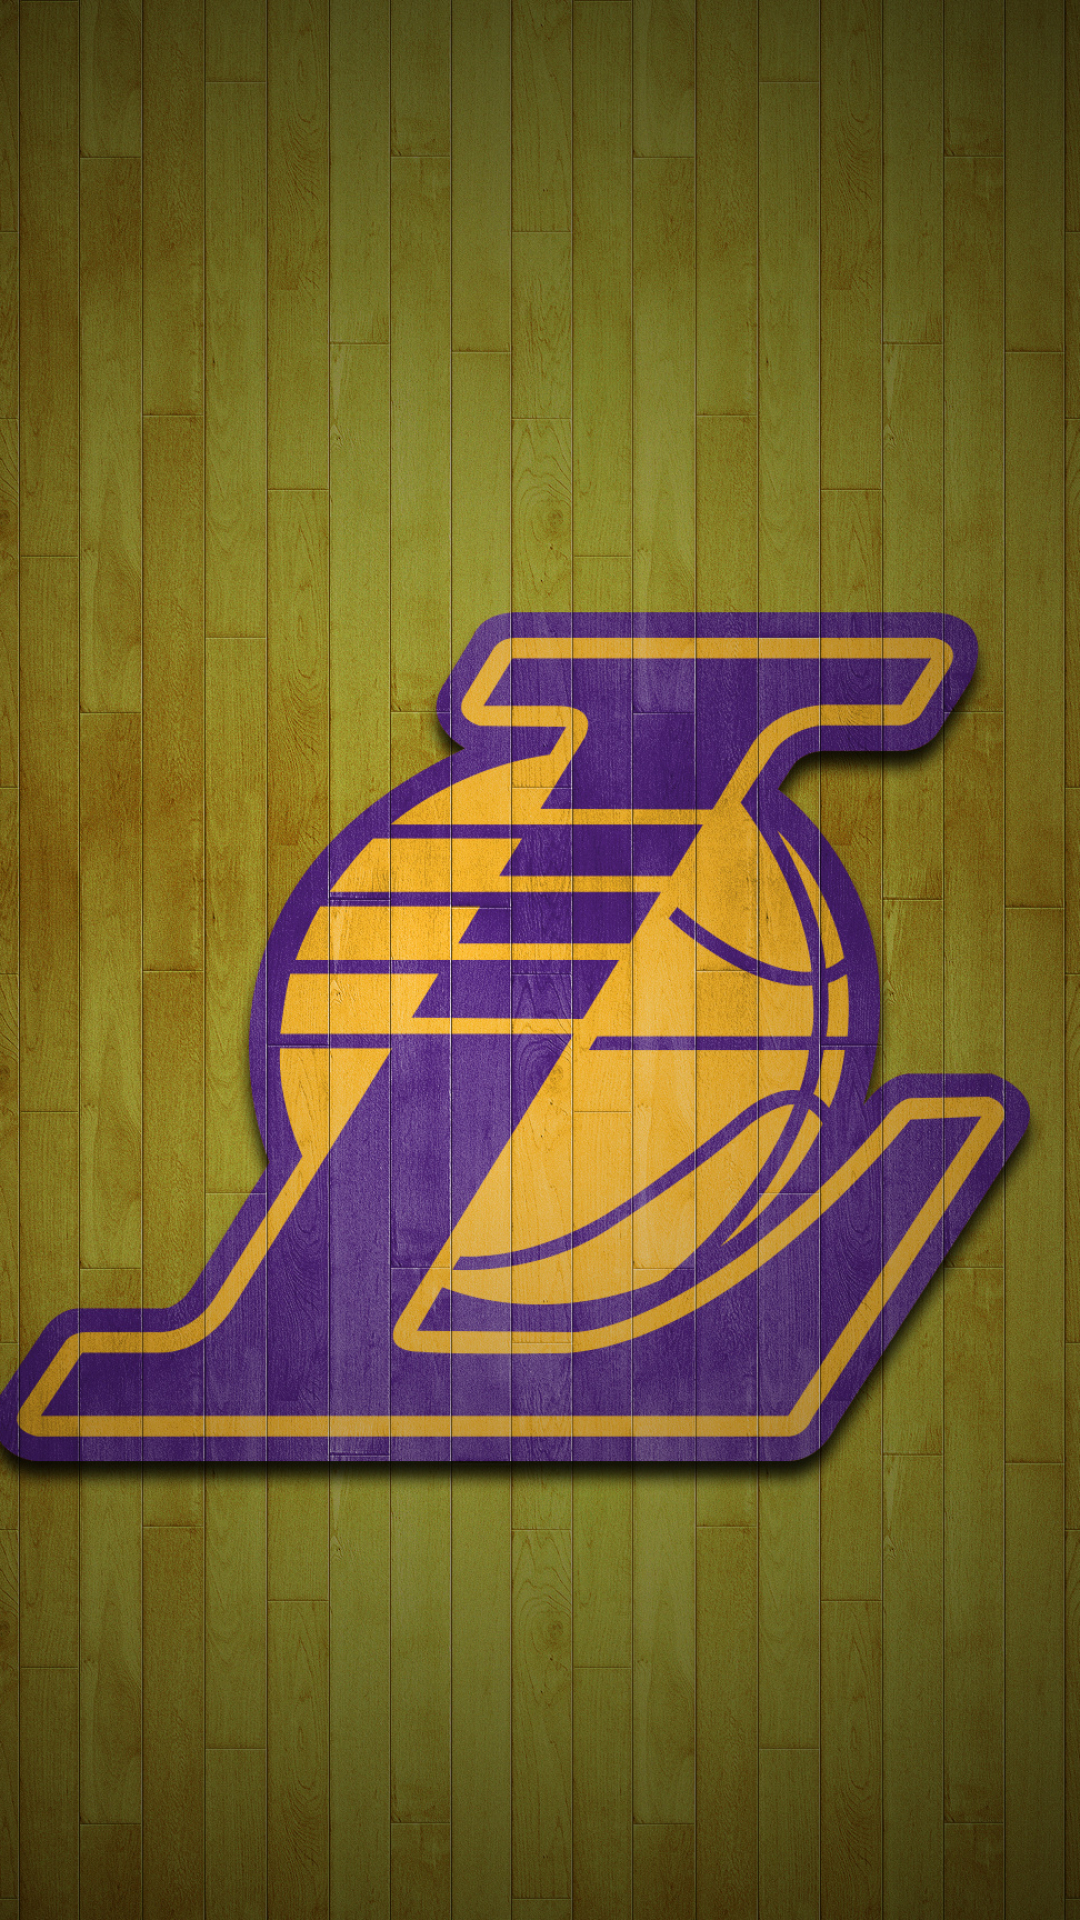 Los Angeles Lakers: The team won the 1949 BAA Finals beating the Washington Capitols. 1080x1920 Full HD Wallpaper.